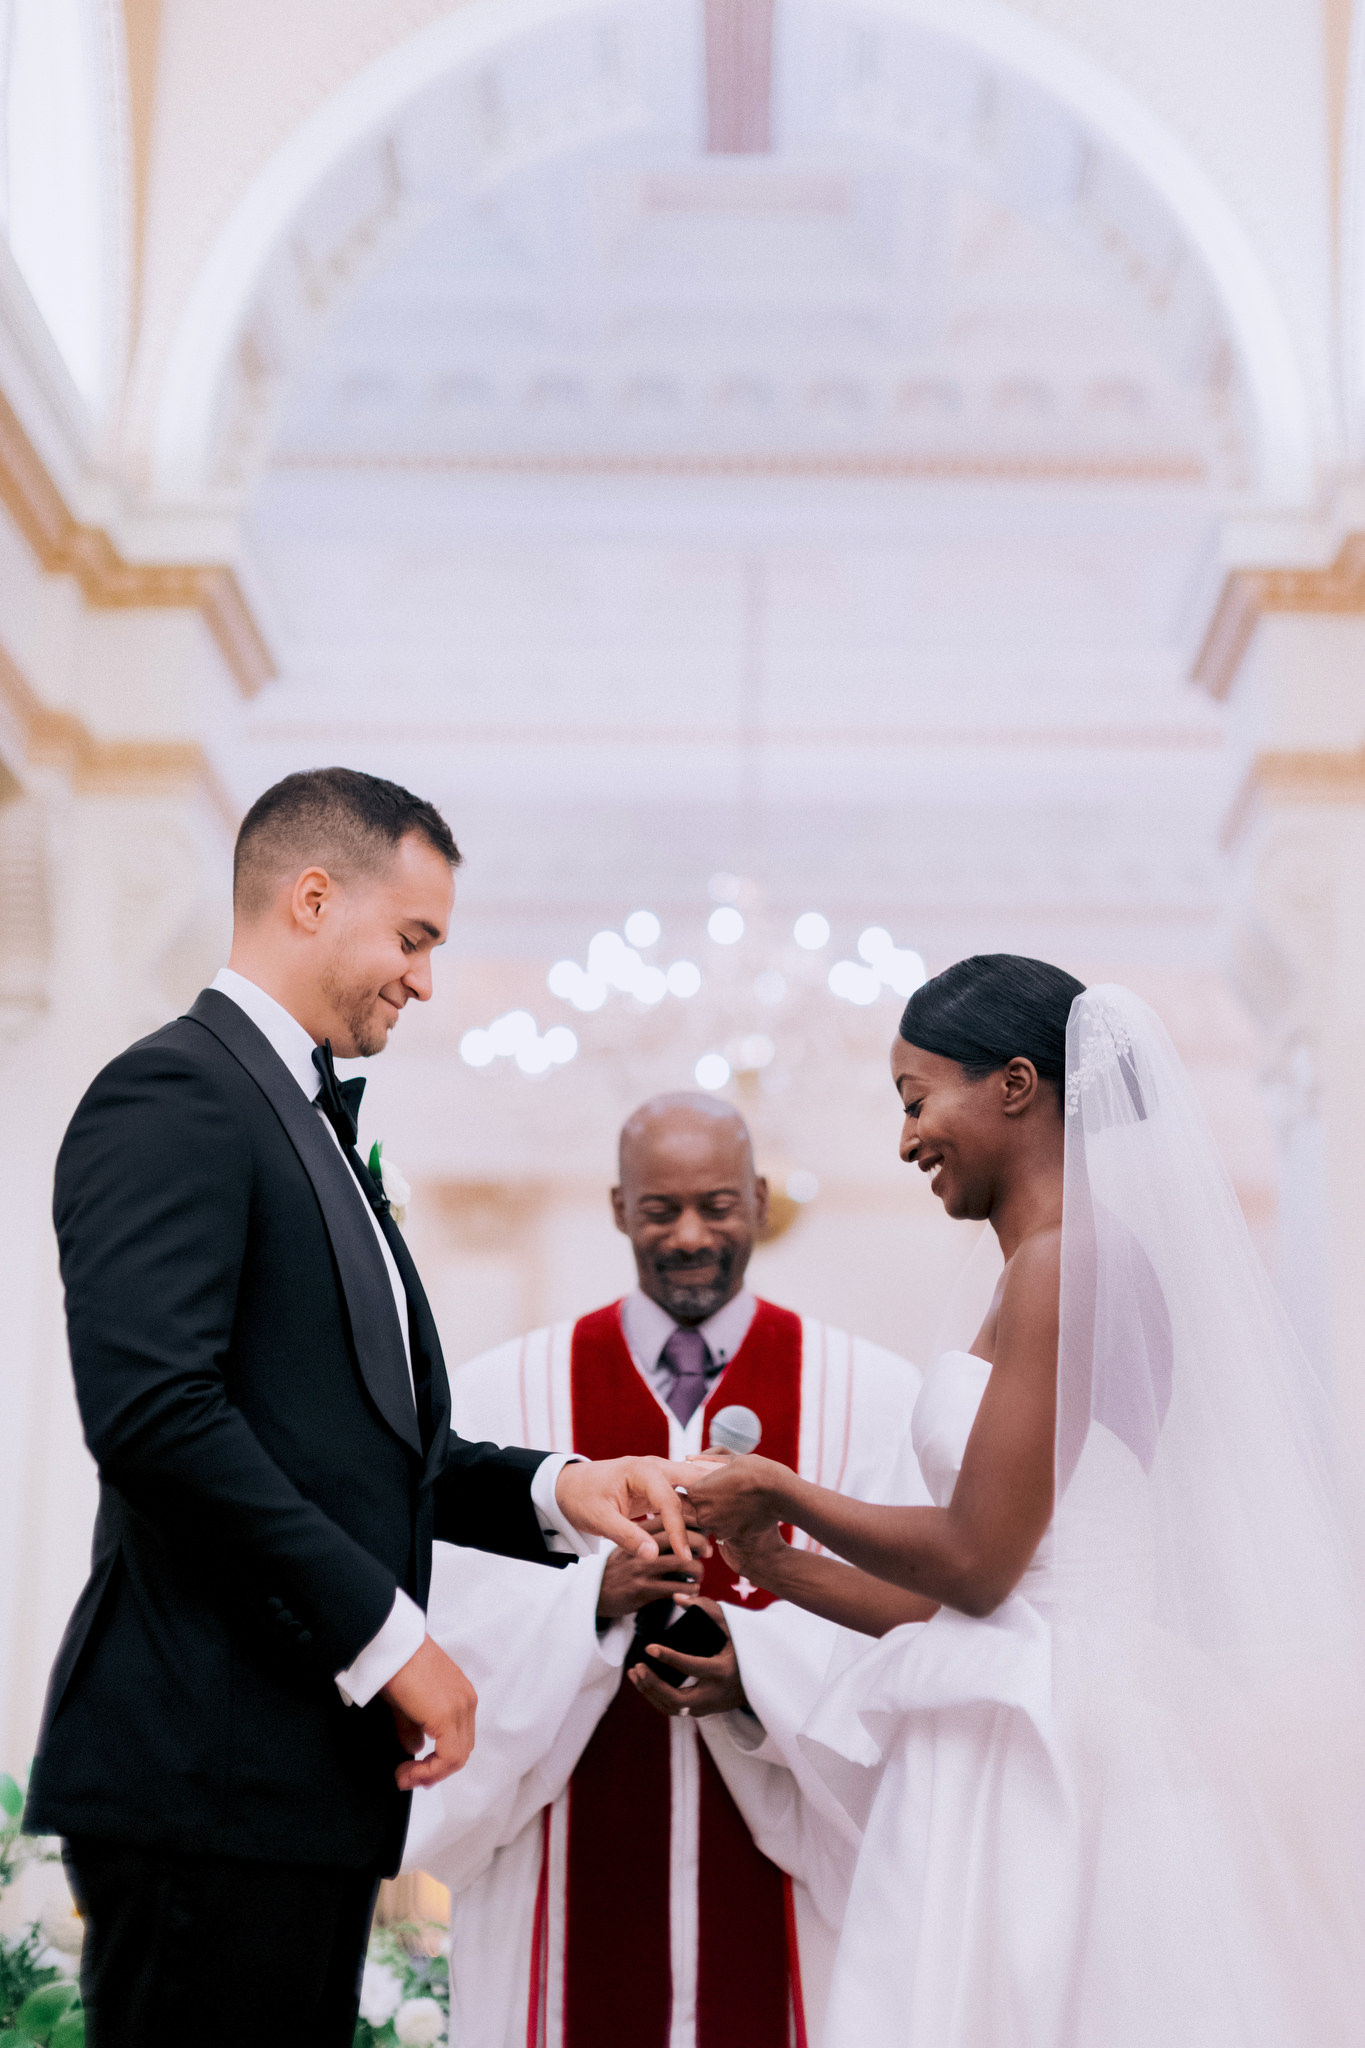 Interracial couple smiling on their wedding day as bride puts ring on grooms finger